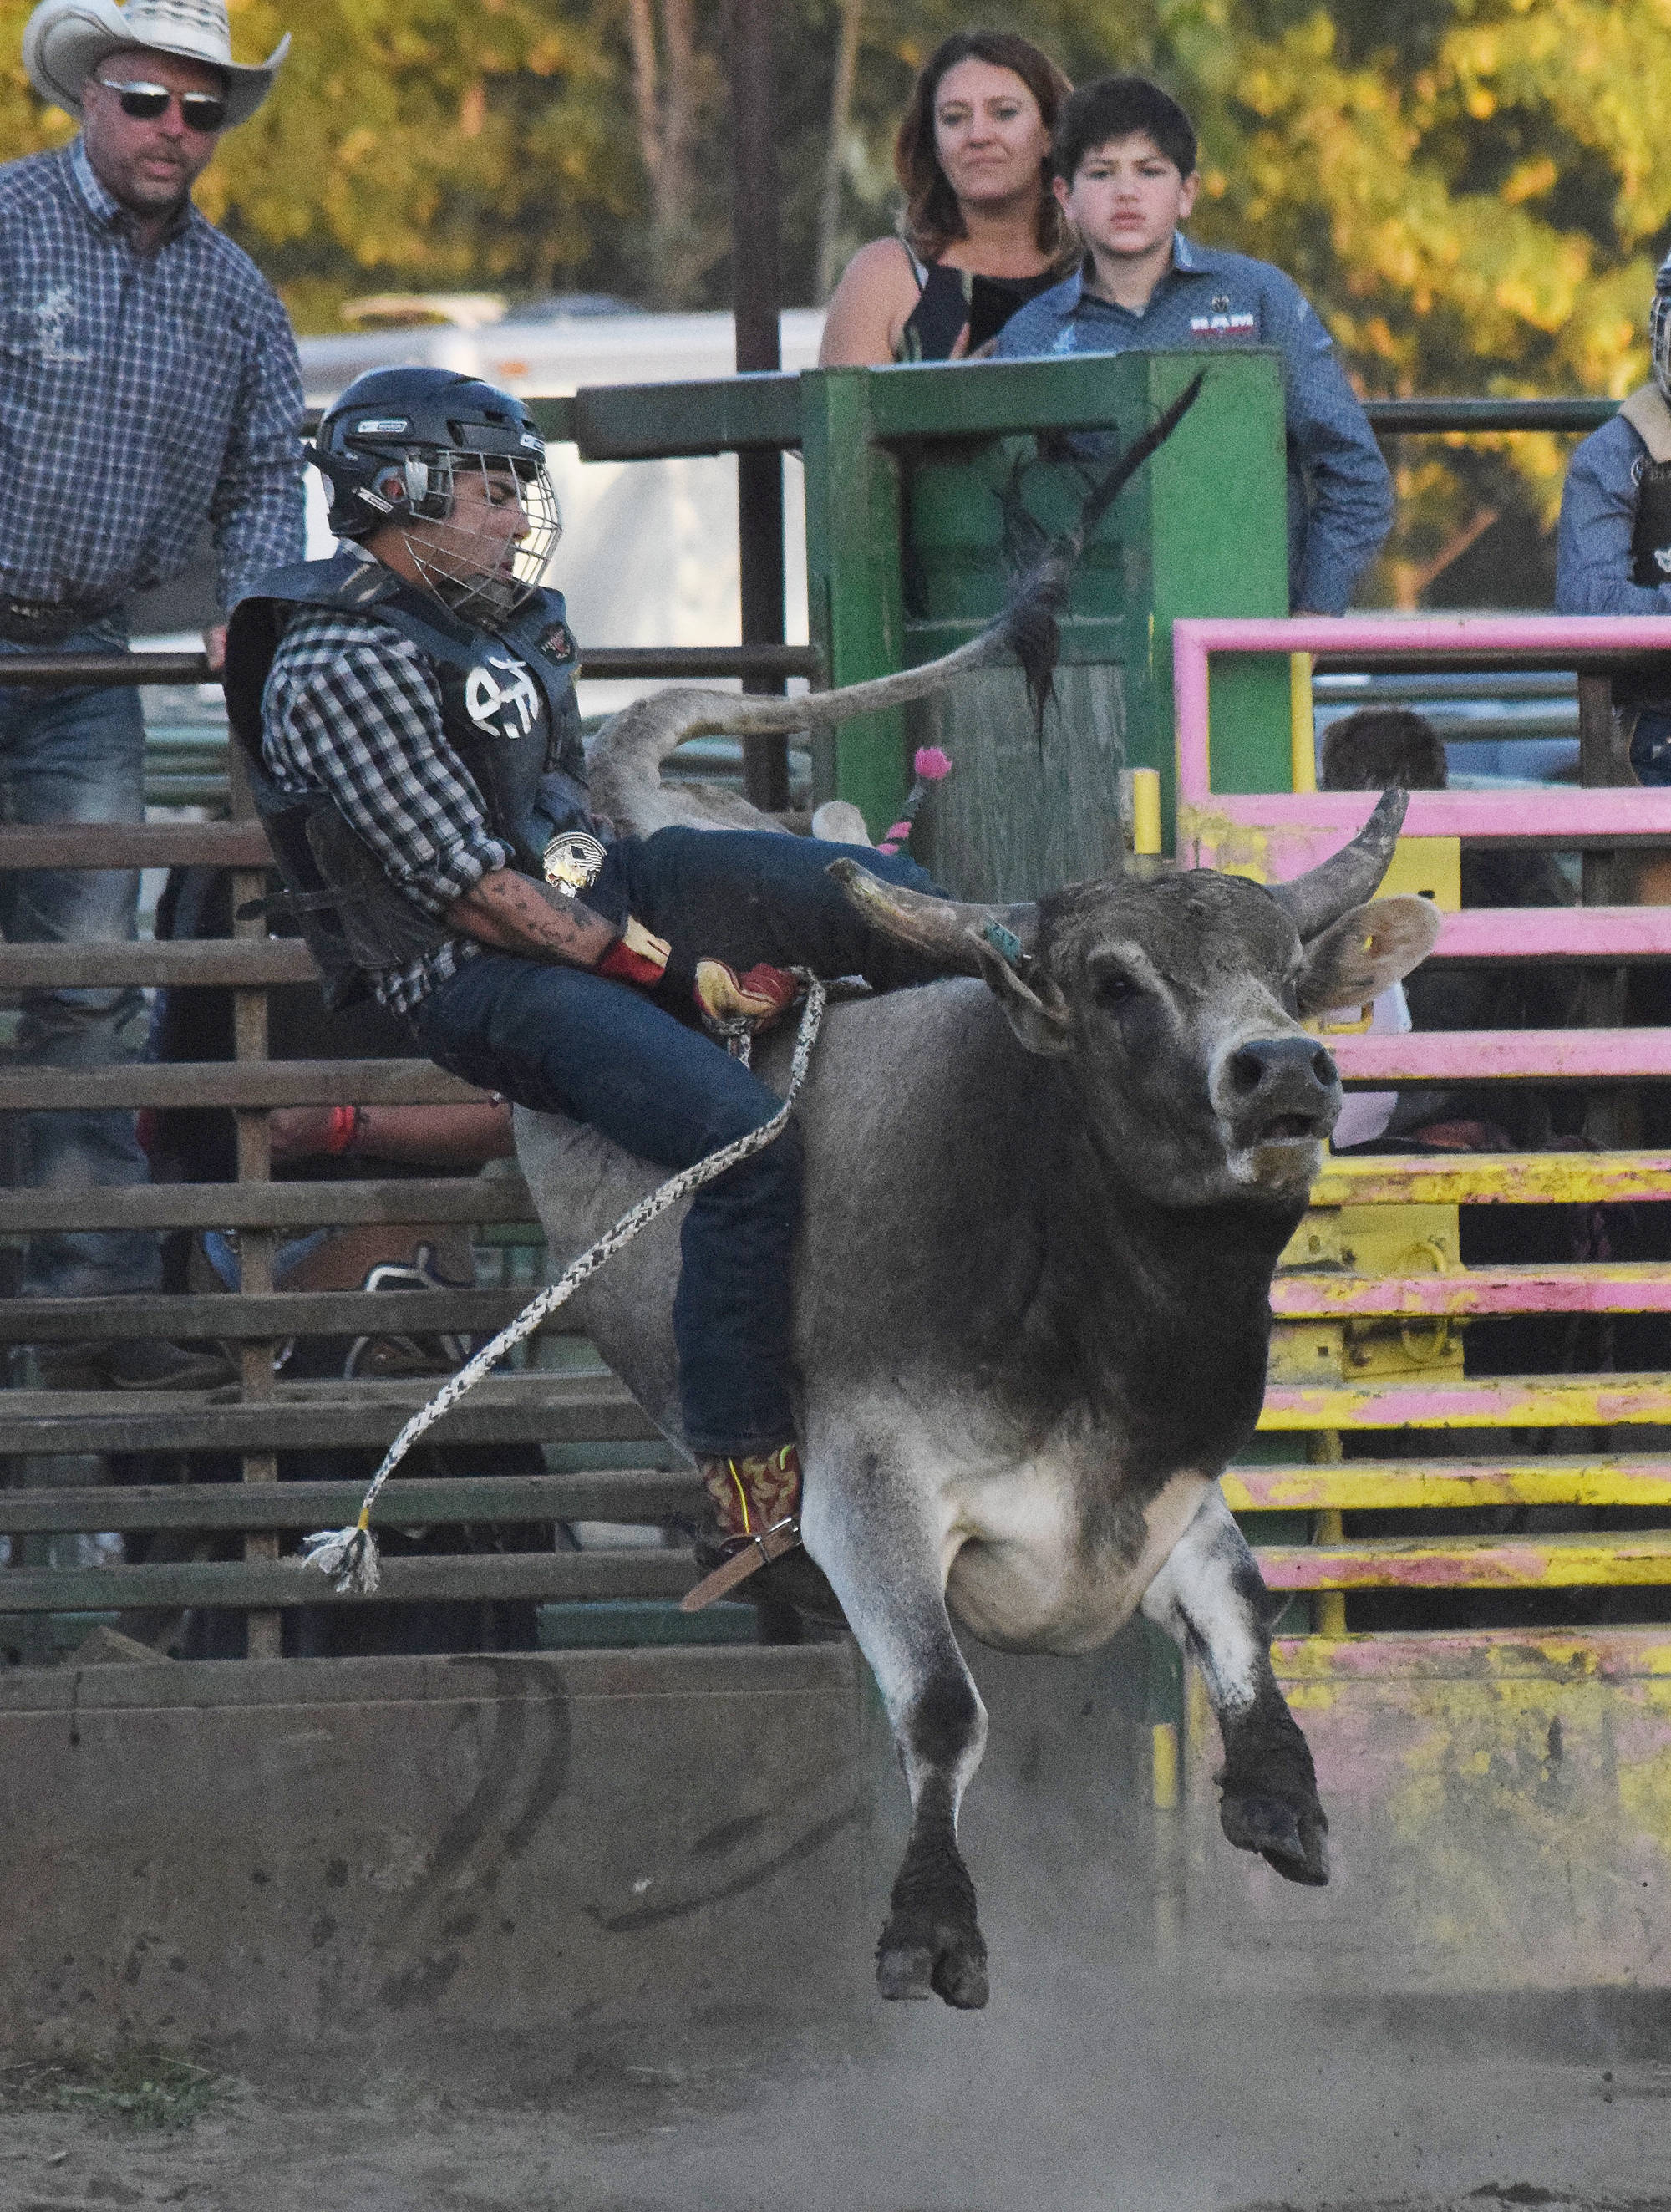 A youth rider attempts to ride out a bucking bull Saturday at the 9/11 Tribute Rodeo at the Soldotna Rodeo Grounds. (Photo by Joey Klecka/Peninsula Clarion)